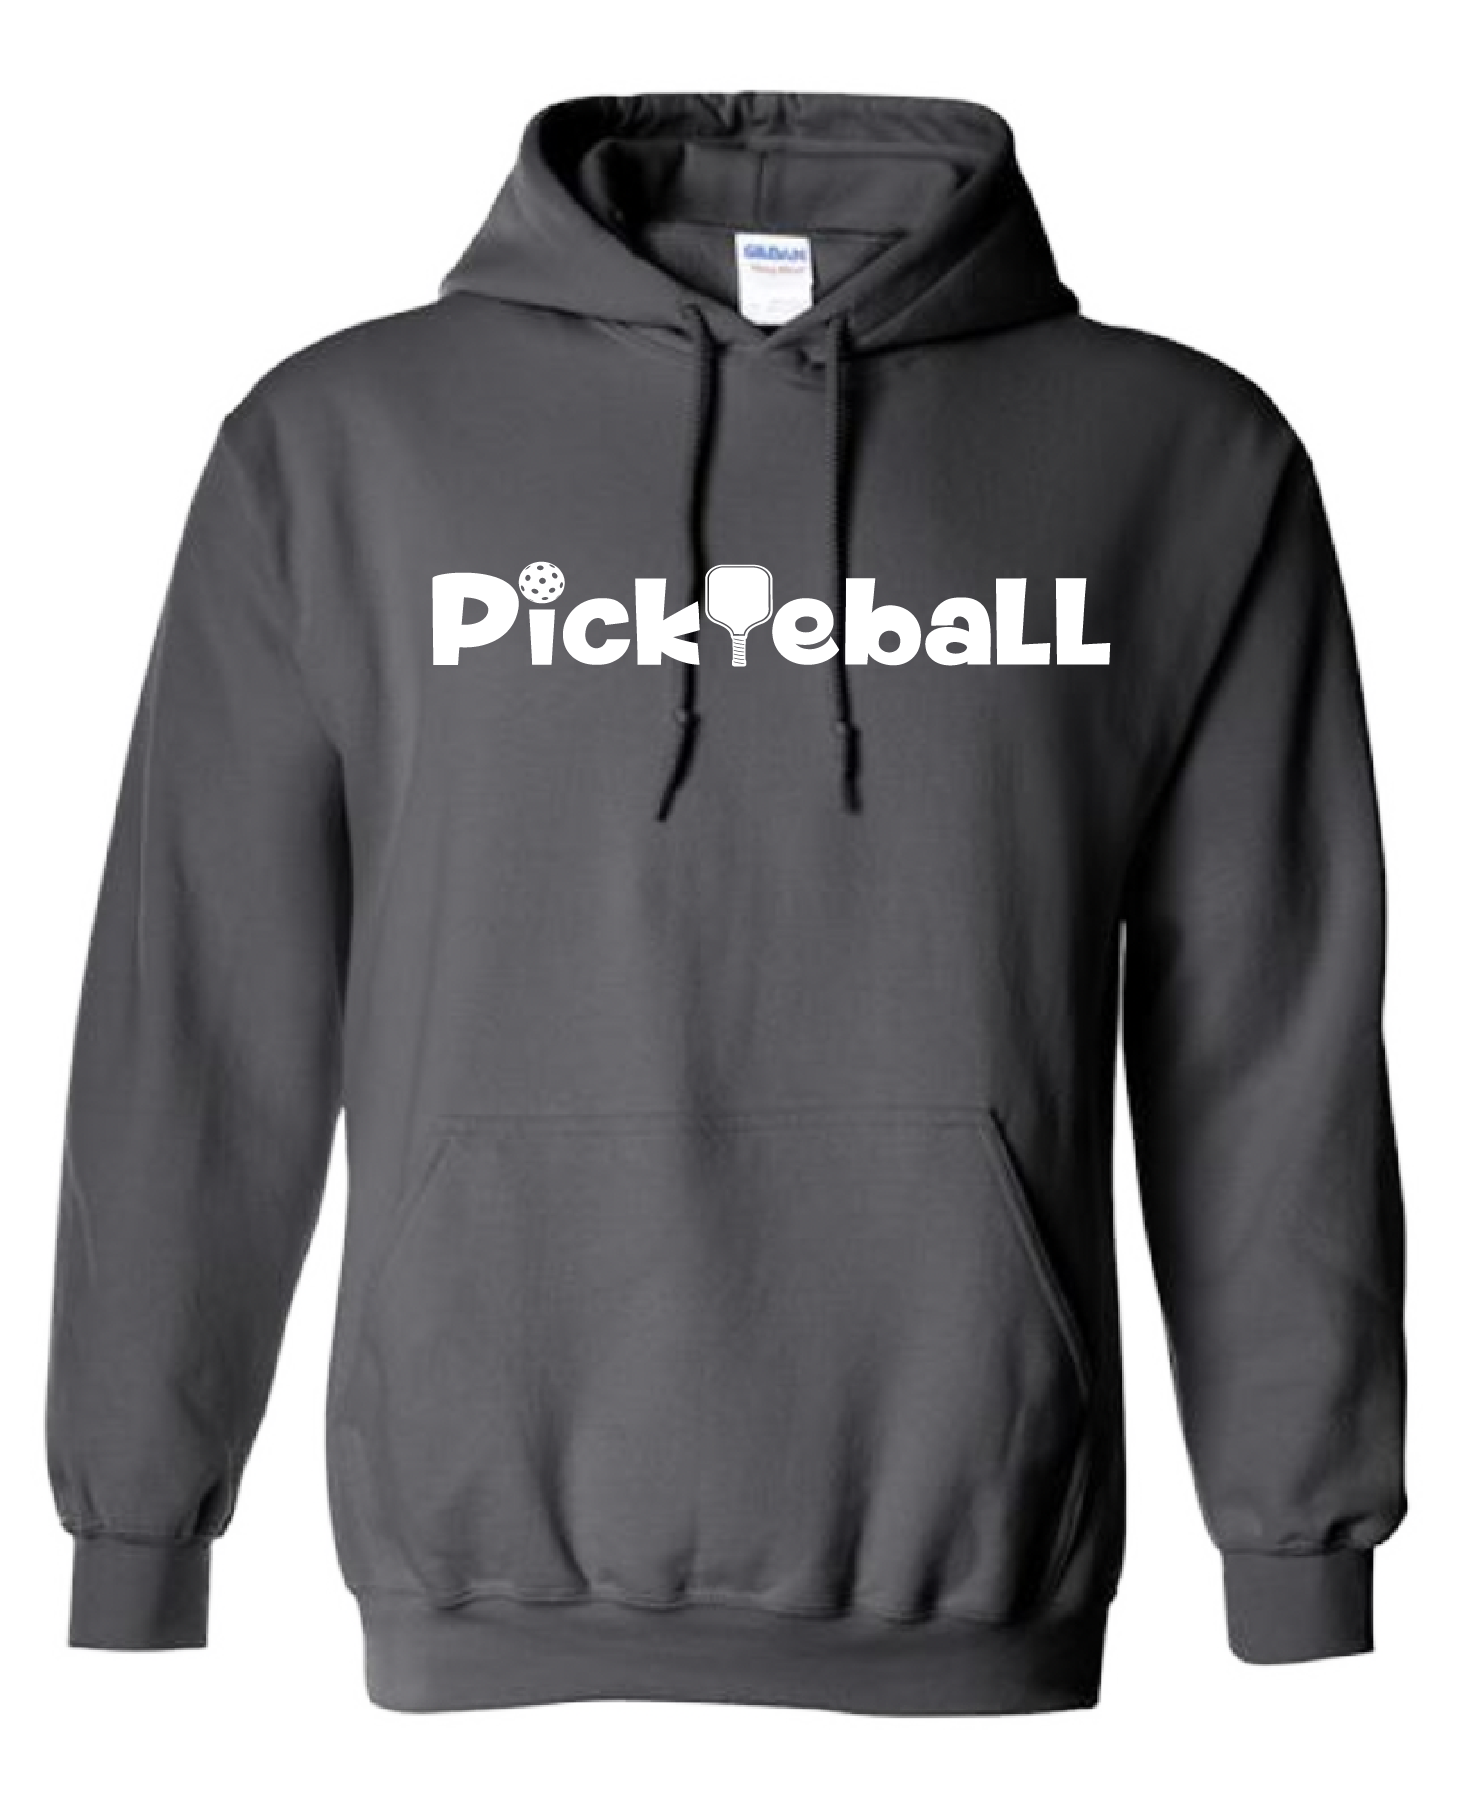 Pickleball Design: Pickleball Horizontal Customizable Location  Men's Style: Long-Sleeve Hoodie  Shirts are lightweight, roomy and highly breathable. These moisture-wicking shirts are designed for athletic performance. They feature PosiCharge technology to lock in color and prevent logos from fading. Removable tag and set-in sleeves for comfort.